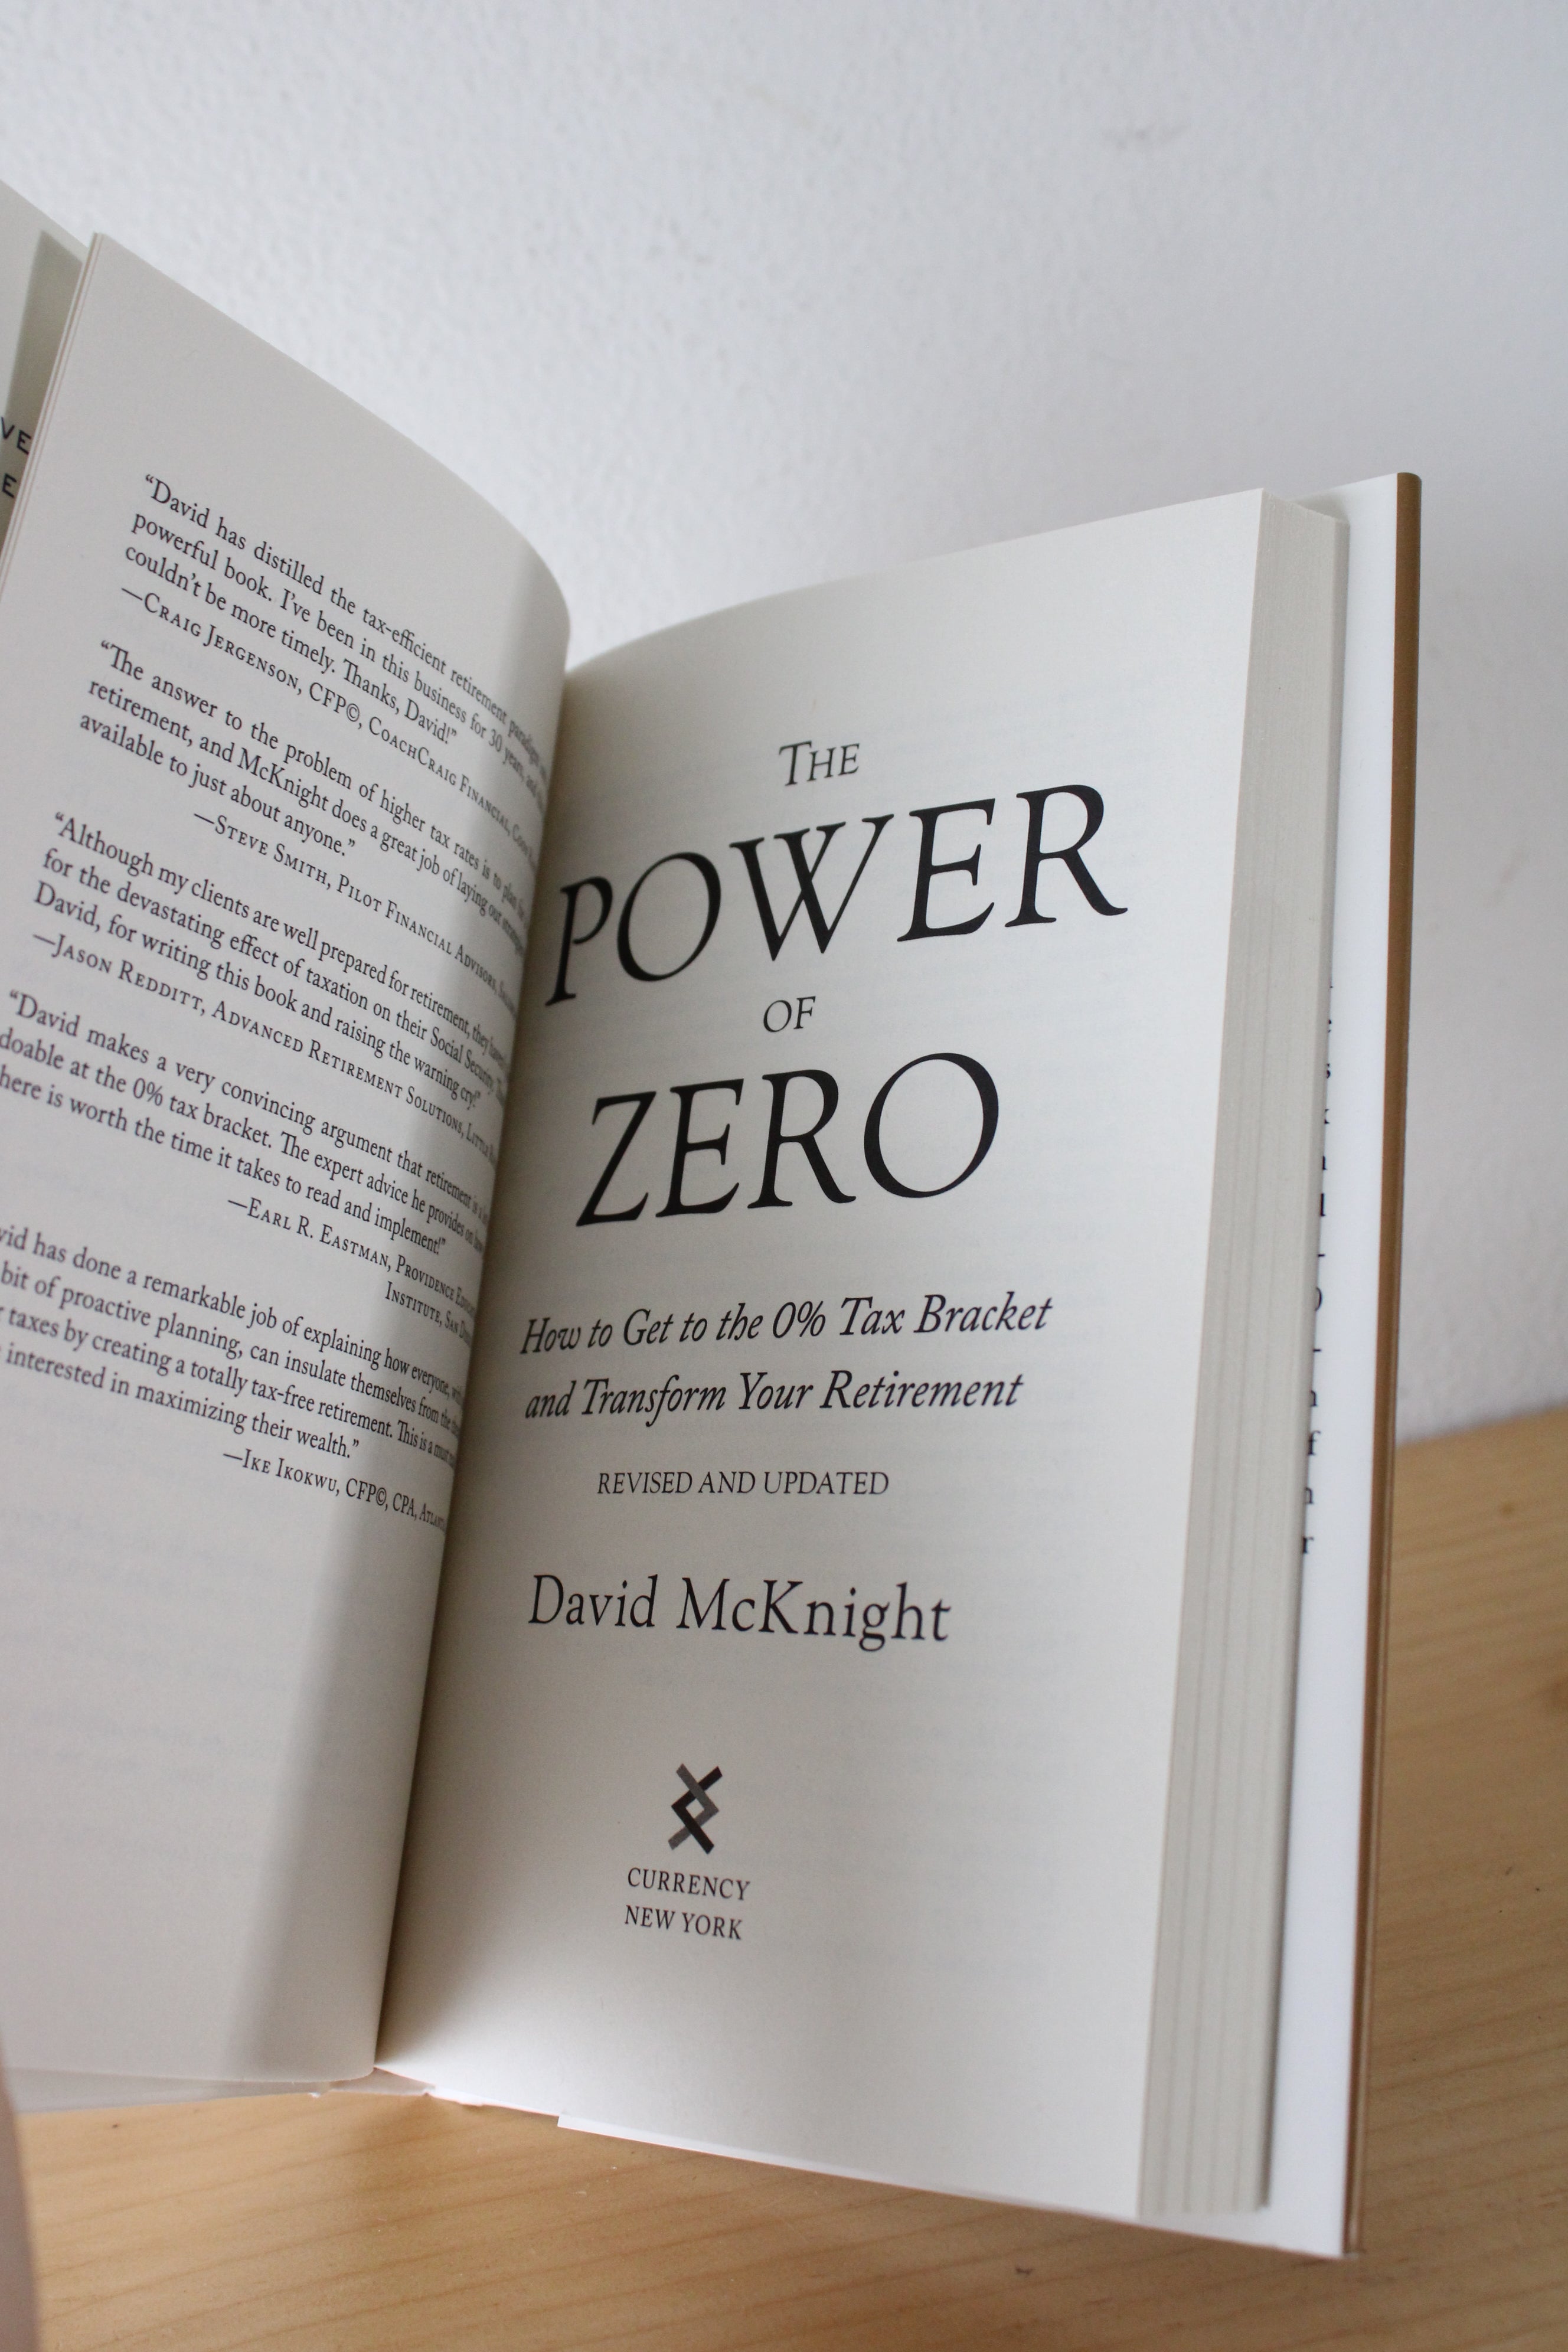 The Power Of Zero: How To Get To The 0% Tax Bracket & Transform Your Retirement By David McKnight